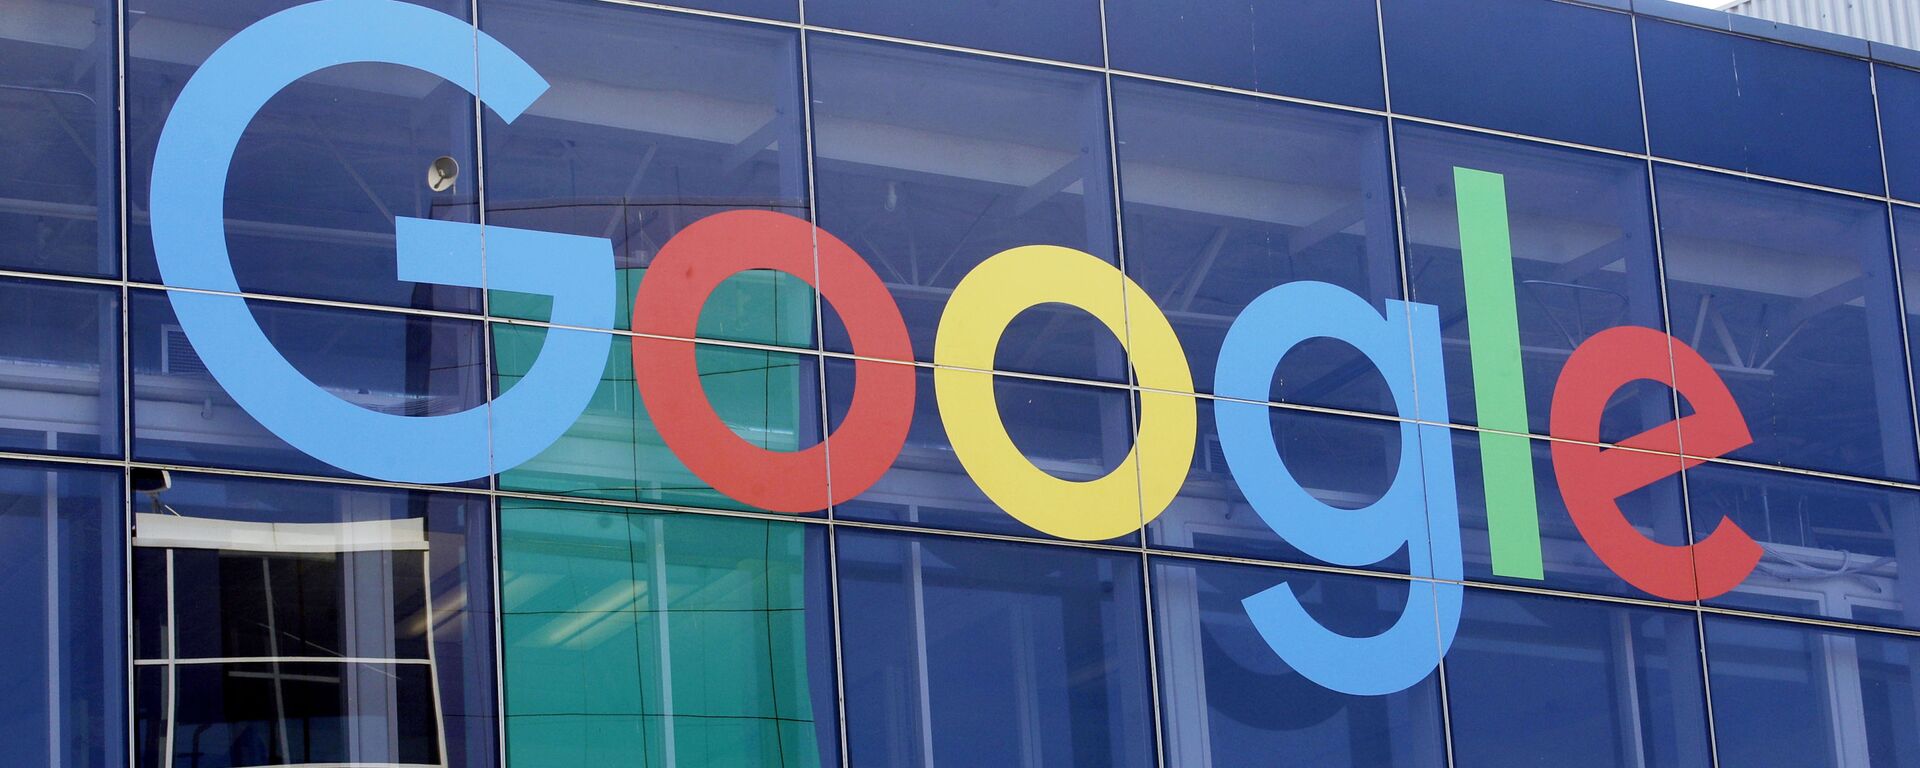 In this Sept. 24, 2019, file photo a sign is shown on a Google building at their campus in Mountain View, Calif. Google is formally pushing back on antitrust claims brought against it by the Justice Department two months ago. - Sputnik International, 1920, 07.09.2022